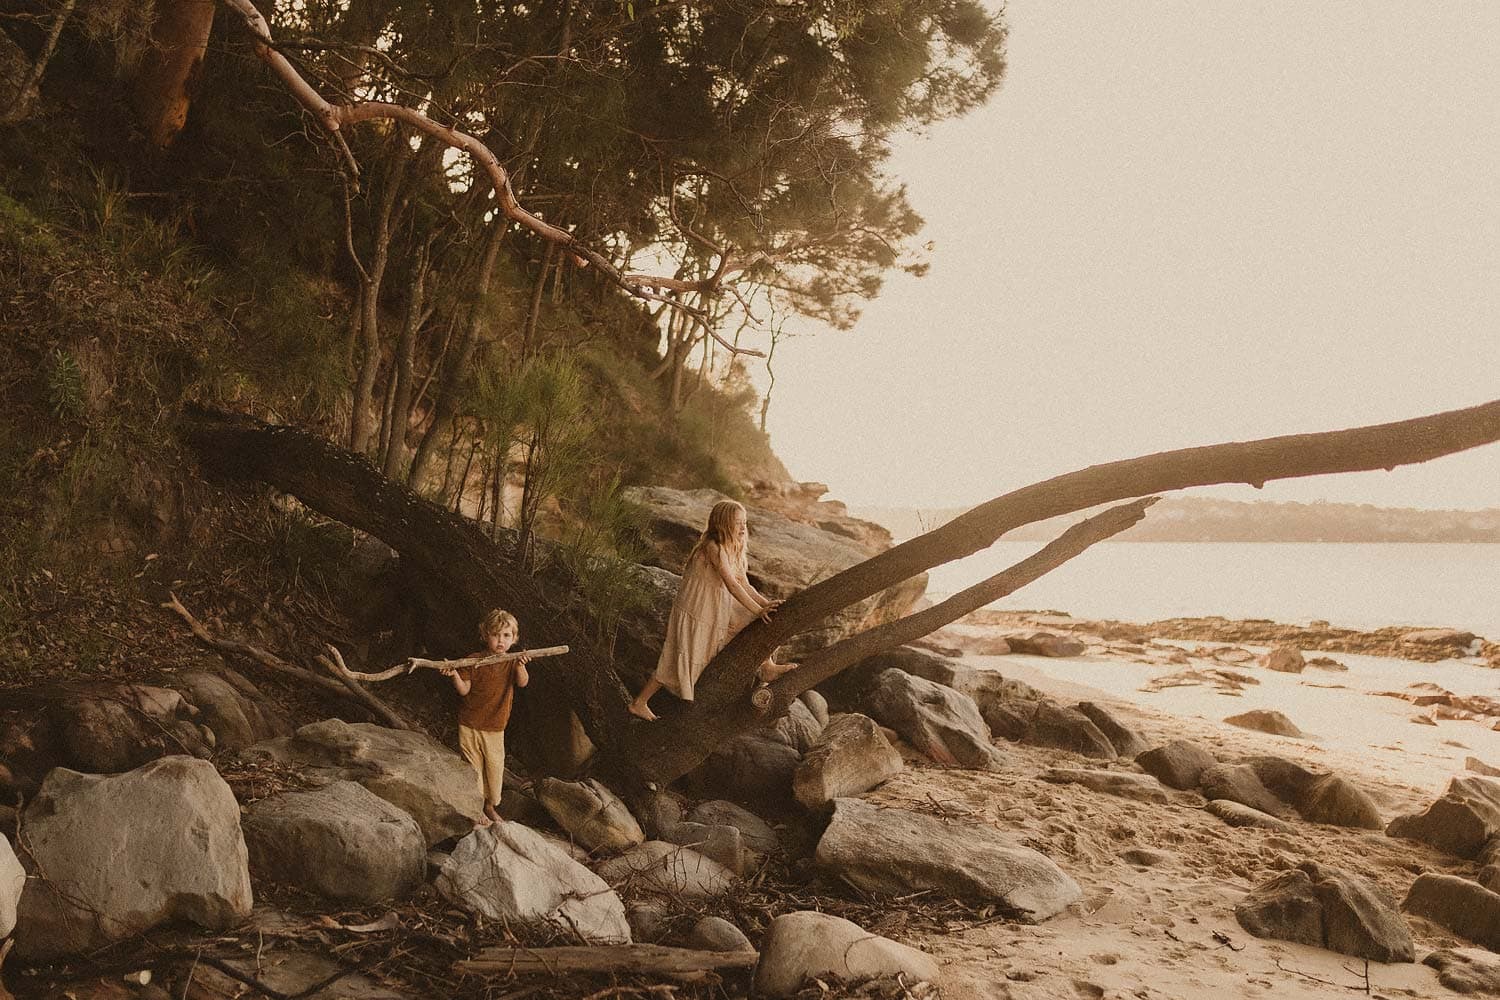 Sydney-lifestyle-family-photographer-little-girl-plays-on-fallen-branch-that-overhangs-the-sandy-shore-whilst-little-boy-plays-next-to-her-on-the-rocks-holding-a-big-stick